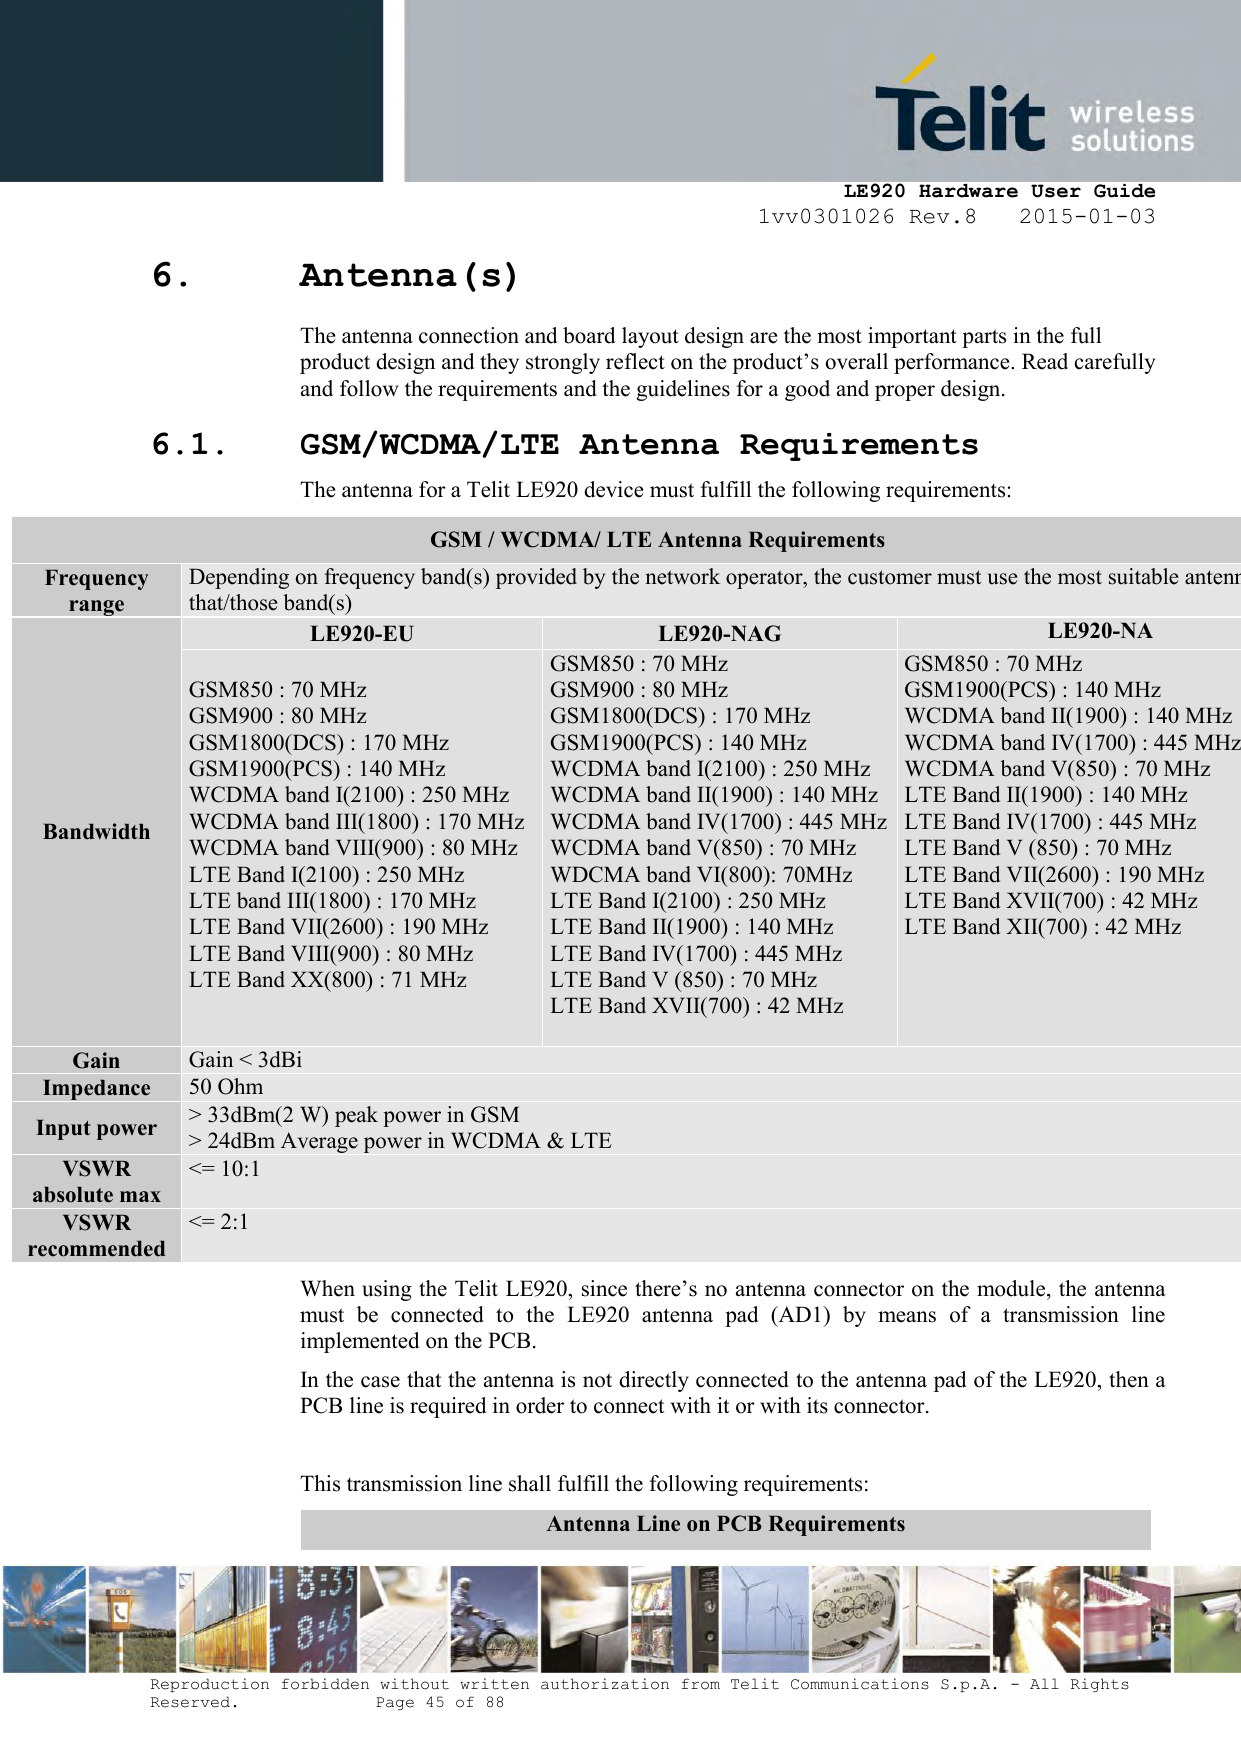     LE920 Hardware User Guide 1vv0301026 Rev.8   2015-01-03 Reproduction forbidden without written authorization from Telit Communications S.p.A. - All Rights Reserved.    Page 45 of 88  6. Antenna(s) The antenna connection and board layout design are the most important parts in the full product design and they strongly reflect on the product’s overall performance. Read carefully and follow the requirements and the guidelines for a good and proper design. 6.1. GSM/WCDMA/LTE Antenna Requirements The antenna for a Telit LE920 device must fulfill the following requirements: When using the Telit LE920, since there’s no antenna connector on the module, the antenna must  be  connected  to  the  LE920  antenna  pad  (AD1)  by  means  of  a  transmission  line implemented on the PCB. In the case that the antenna is not directly connected to the antenna pad of the LE920, then a PCB line is required in order to connect with it or with its connector.  This transmission line shall fulfill the following requirements: Antenna Line on PCB Requirements GSM / WCDMA/ LTE Antenna Requirements Frequency range Depending on frequency band(s) provided by the network operator, the customer must use the most suitable antenna for that/those band(s) Bandwidth LE920-EU LE920-NAG LE920-NA GSM850 : 70 MHz GSM900 : 80 MHz GSM1800(DCS) : 170 MHz GSM1900(PCS) : 140 MHz  WCDMA band I(2100) : 250 MHz WCDMA band III(1800) : 170 MHz WCDMA band VIII(900) : 80 MHz LTE Band I(2100) : 250 MHz LTE band III(1800) : 170 MHz LTE Band VII(2600) : 190 MHz LTE Band VIII(900) : 80 MHz LTE Band XX(800) : 71 MHz  GSM850 : 70 MHz GSM900 : 80 MHz GSM1800(DCS) : 170 MHz GSM1900(PCS) : 140 MHz WCDMA band I(2100) : 250 MHz WCDMA band II(1900) : 140 MHz WCDMA band IV(1700) : 445 MHz WCDMA band V(850) : 70 MHz WDCMA band VI(800): 70MHz LTE Band I(2100) : 250 MHz LTE Band II(1900) : 140 MHz LTE Band IV(1700) : 445 MHz LTE Band V (850) : 70 MHz LTE Band XVII(700) : 42 MHz   GSM850 : 70 MHz GSM1900(PCS) : 140 MHz WCDMA band II(1900) : 140 MHz WCDMA band IV(1700) : 445 MHz WCDMA band V(850) : 70 MHz LTE Band II(1900) : 140 MHz LTE Band IV(1700) : 445 MHz LTE Band V (850) : 70 MHz LTE Band VII(2600) : 190 MHz LTE Band XVII(700) : 42 MHz LTE Band XII(700) : 42 MHz  Gain Gain &lt; 3dBi Impedance 50 Ohm Input power &gt; 33dBm(2 W) peak power in GSM &gt; 24dBm Average power in WCDMA &amp; LTE VSWR absolute max &lt;= 10:1 VSWR recommended &lt;= 2:1 